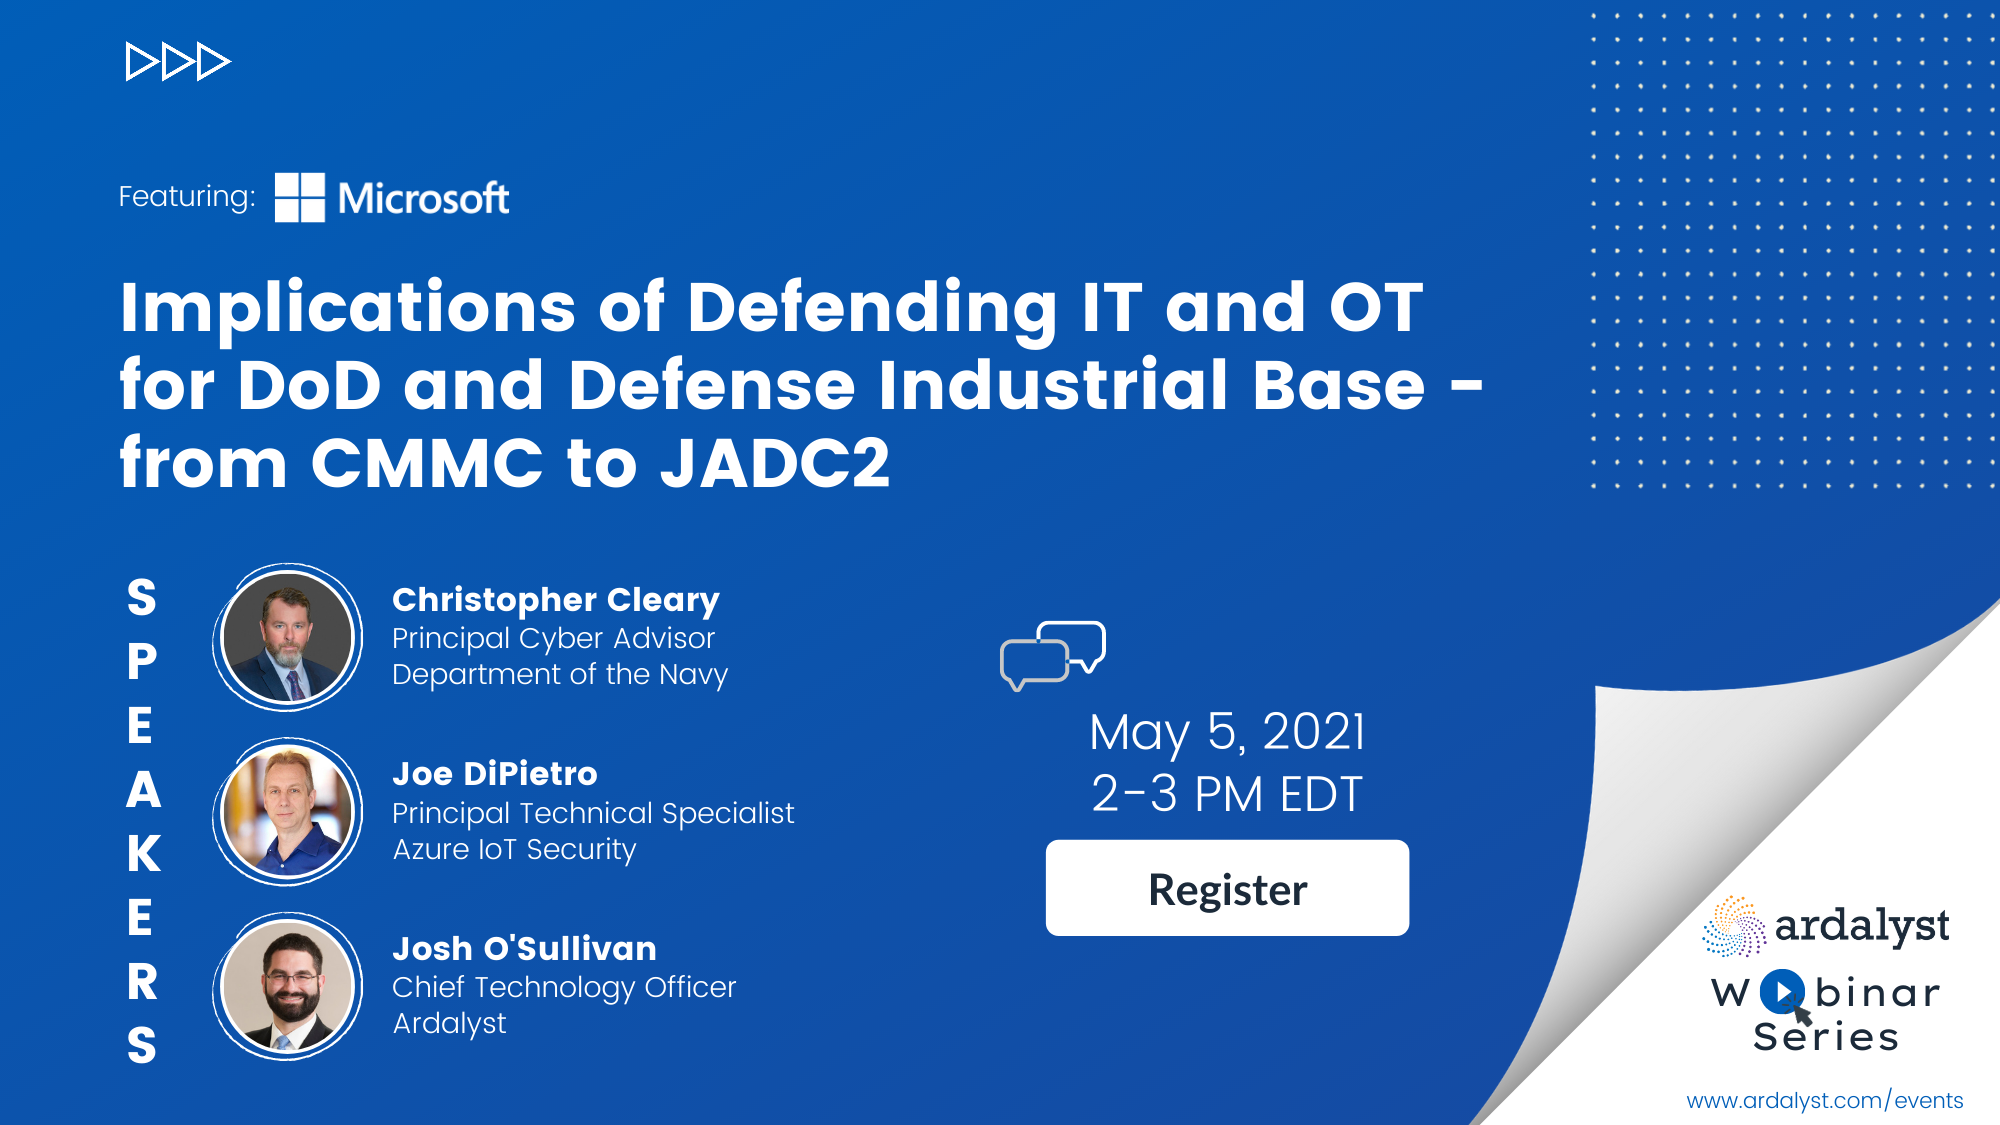 Implications of Defending IT and OT for DoD and Defense Industrial Base - from CMMC to JADC2